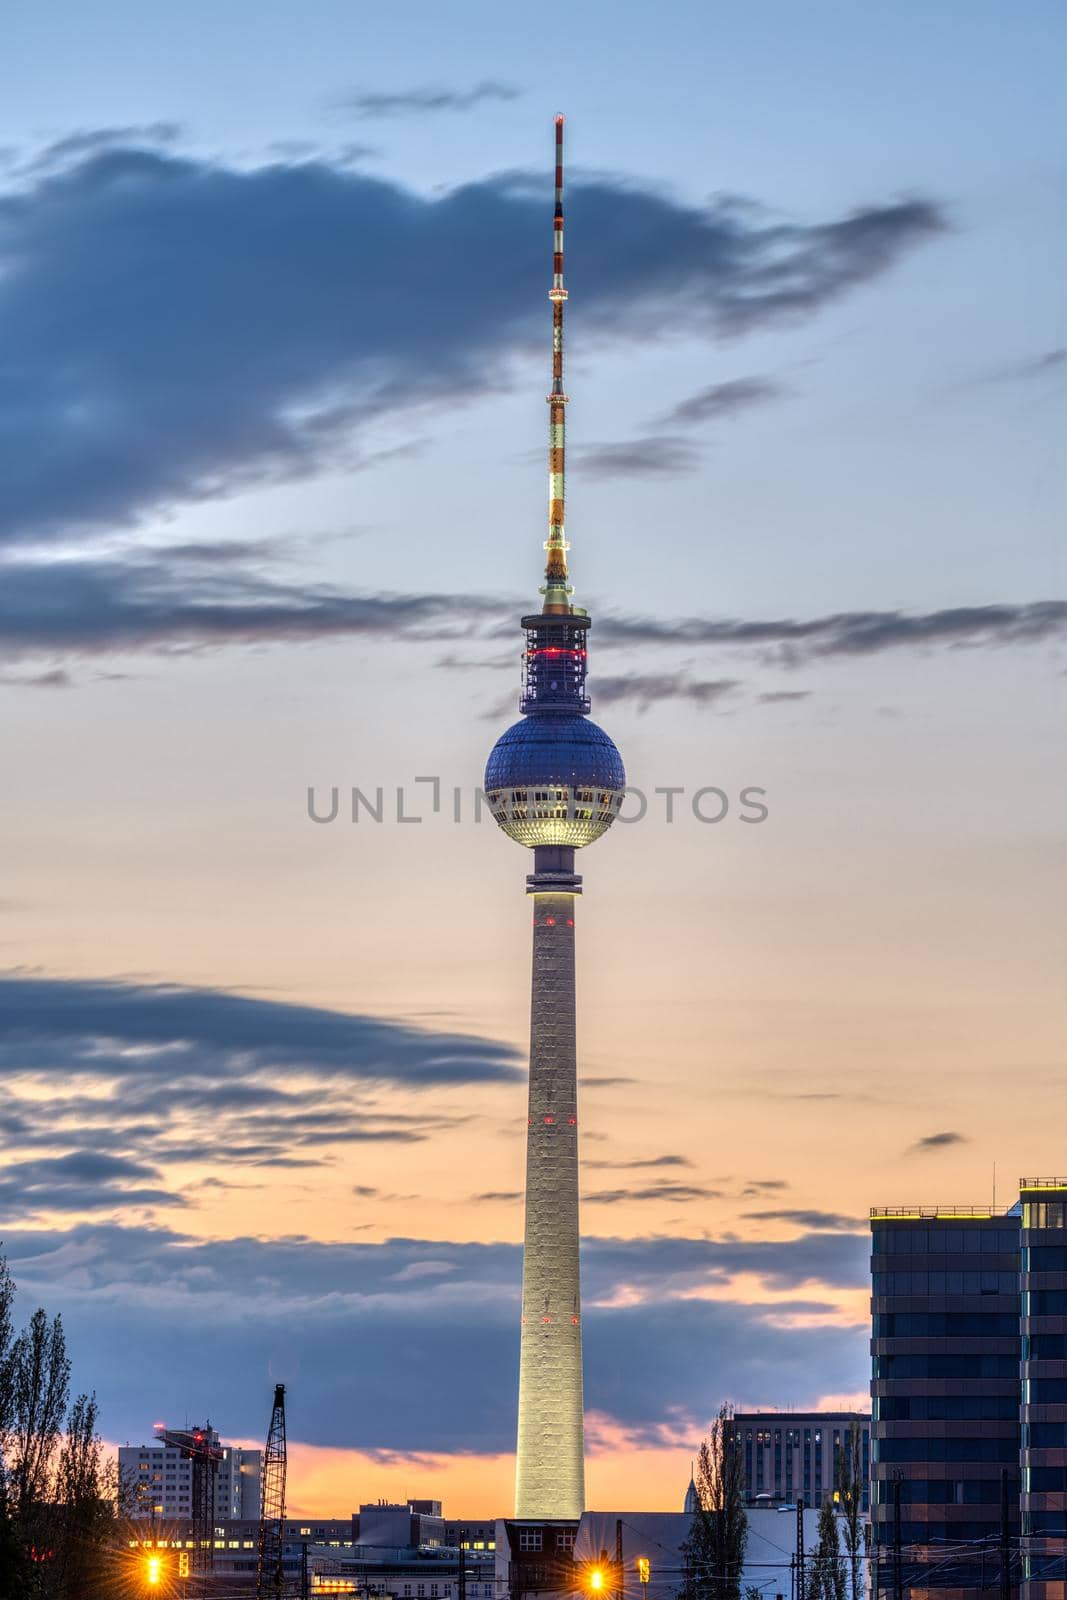 The famous TV Tower in Berlin after sunset